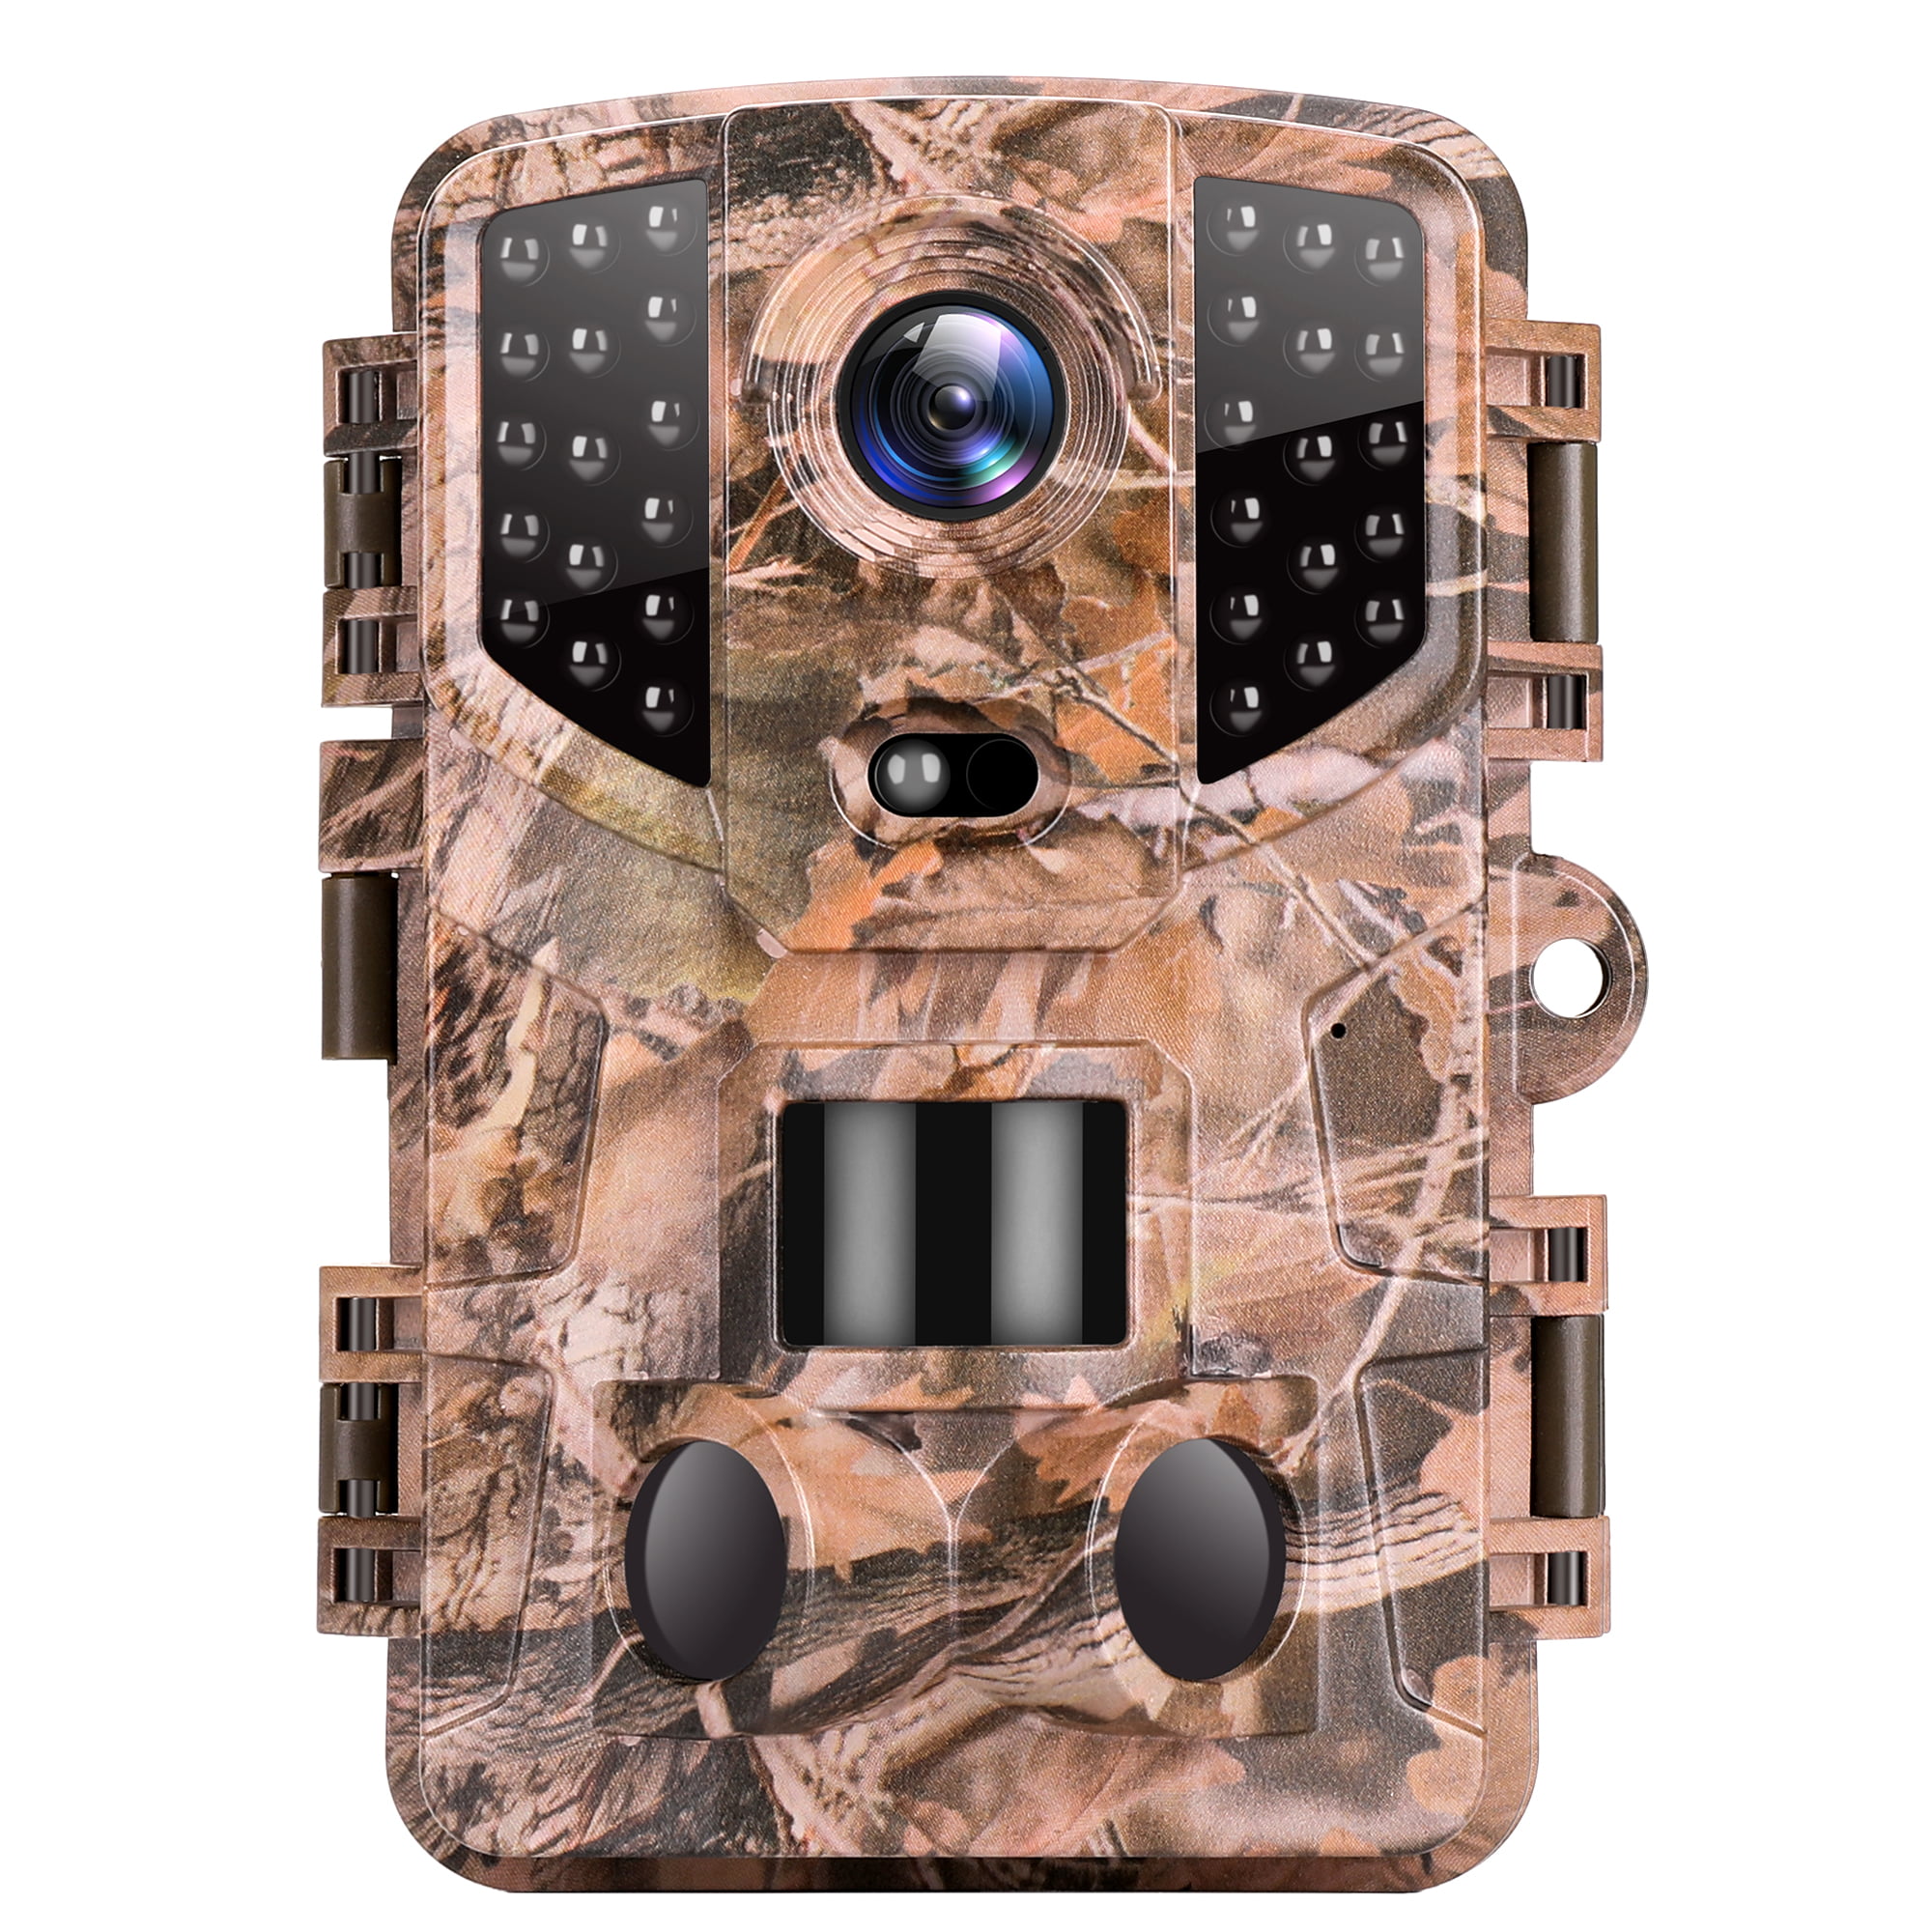 Game & Trail Cameras 20MP 1080P H.264 MP4 Video 70ft Night Vision Time La 